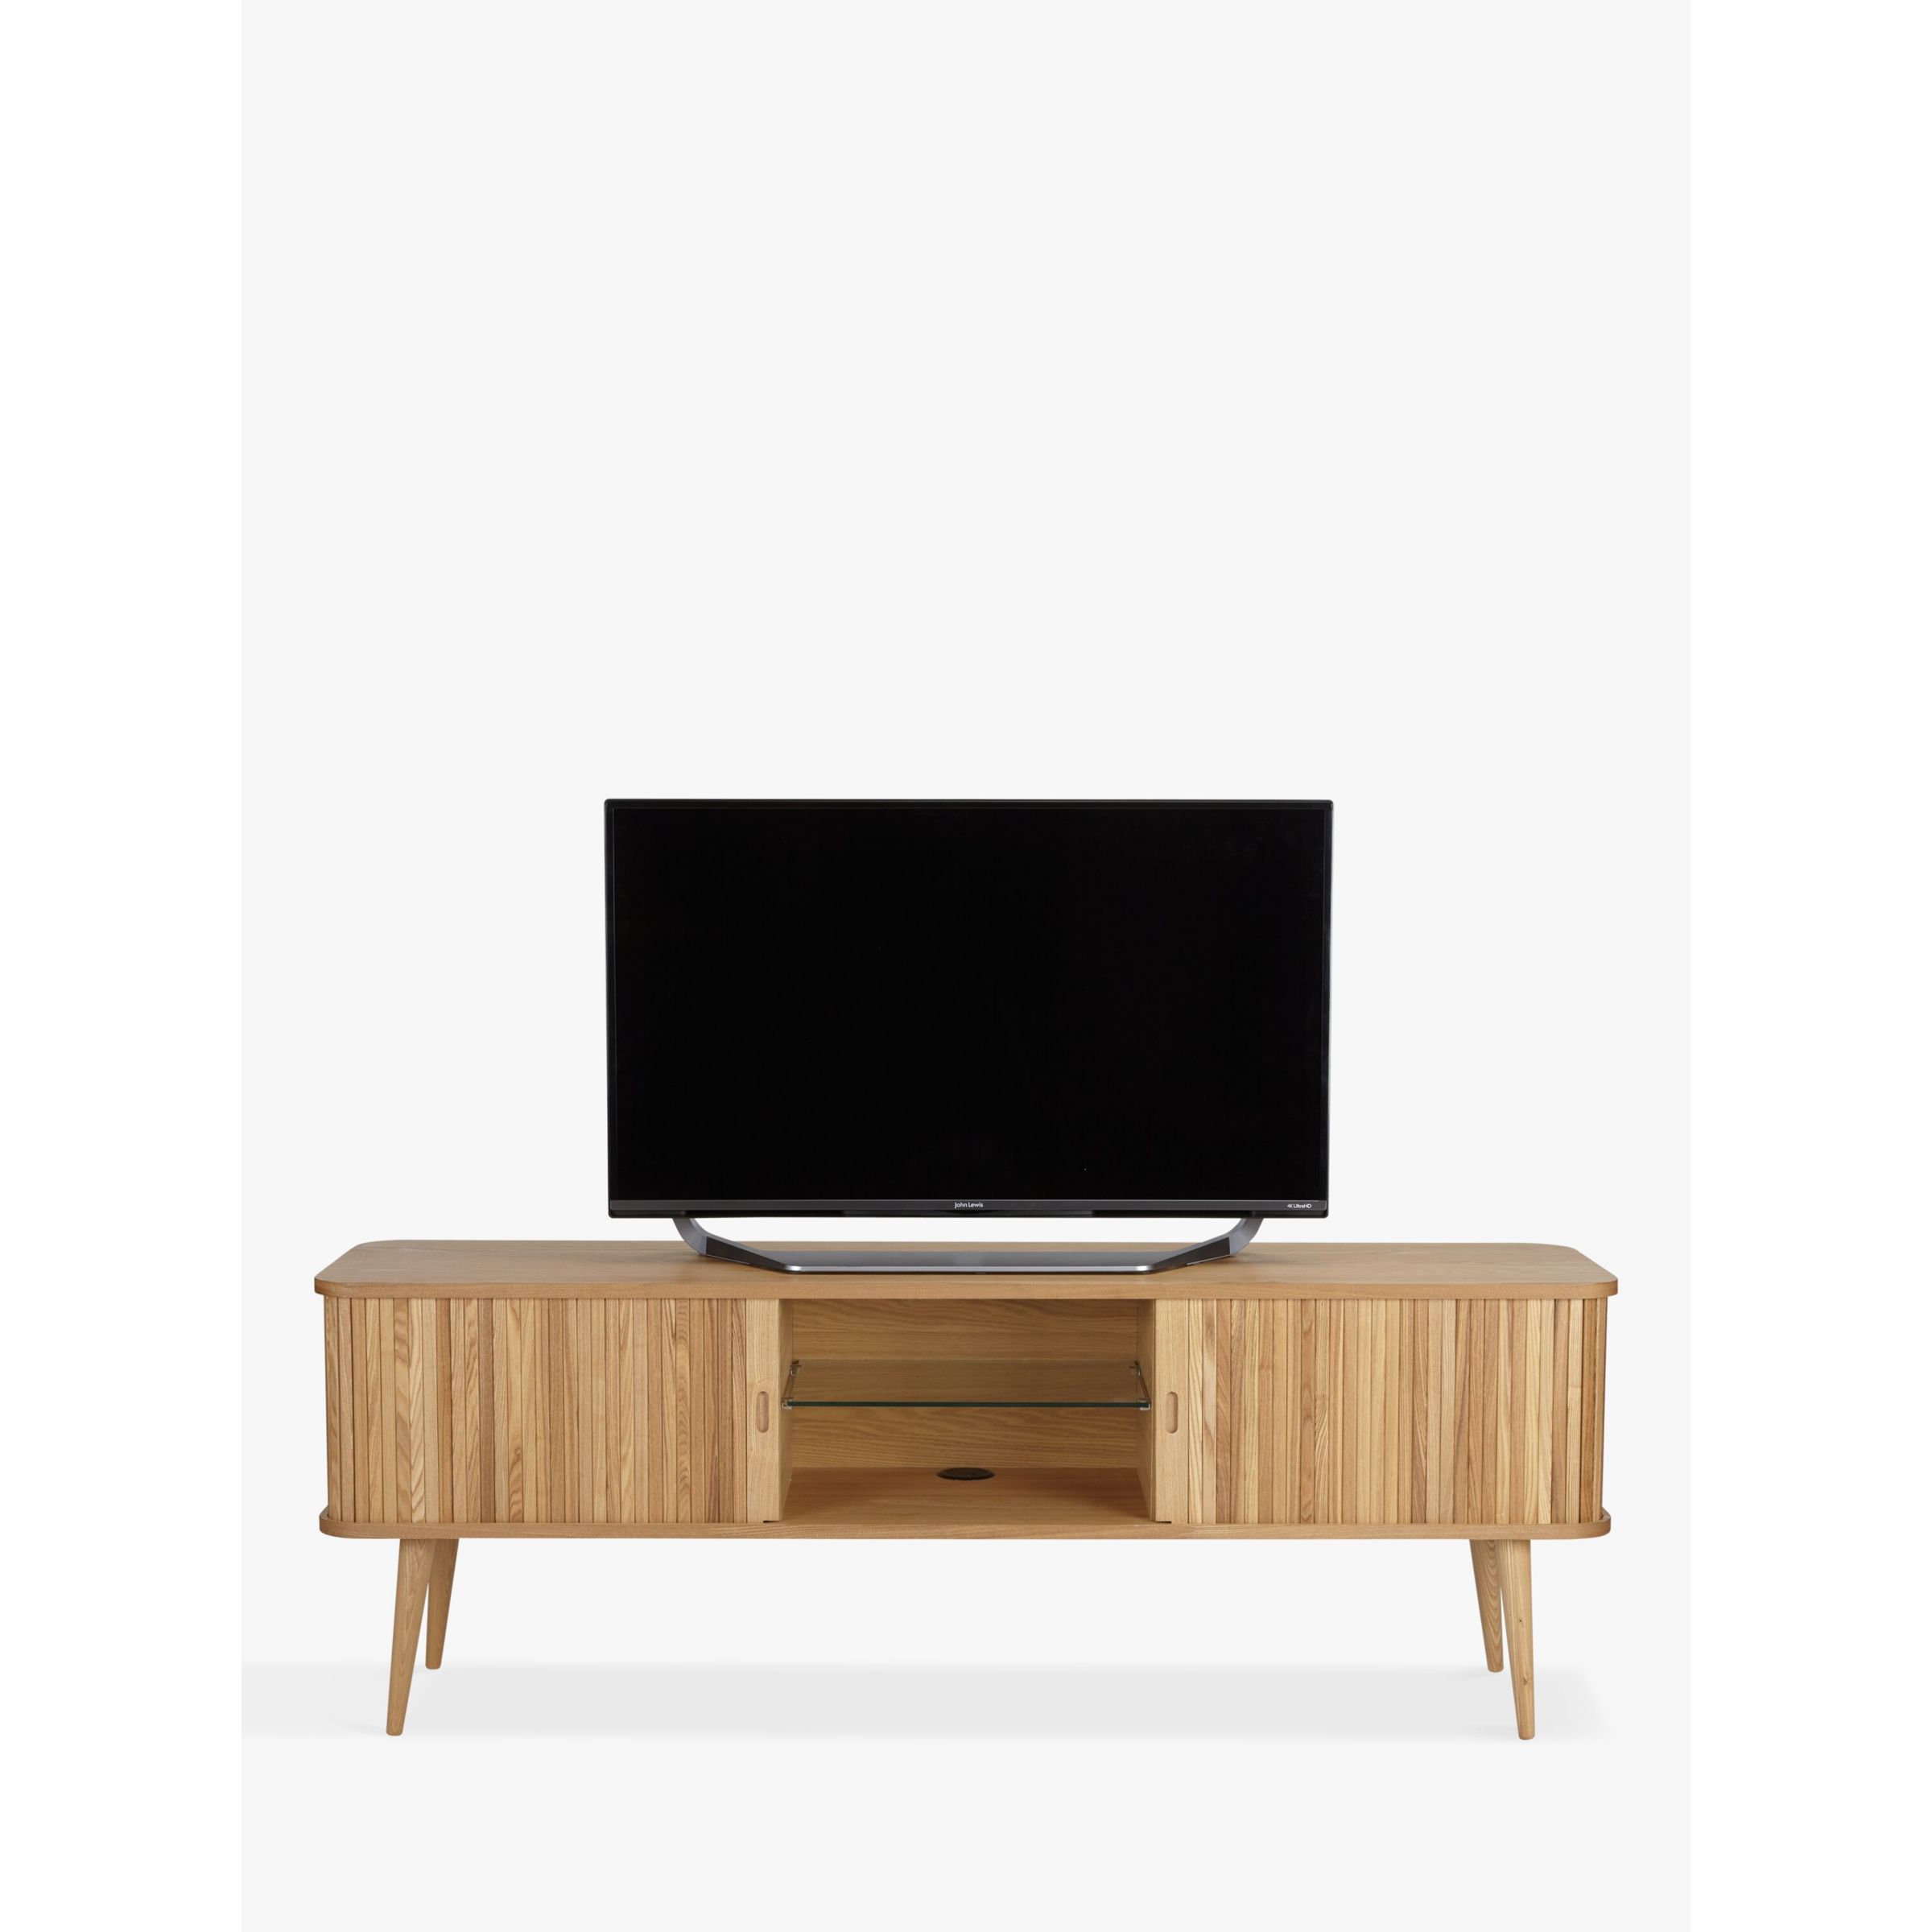 John Lewis Grayson Large TV Stand for TVs up to 70